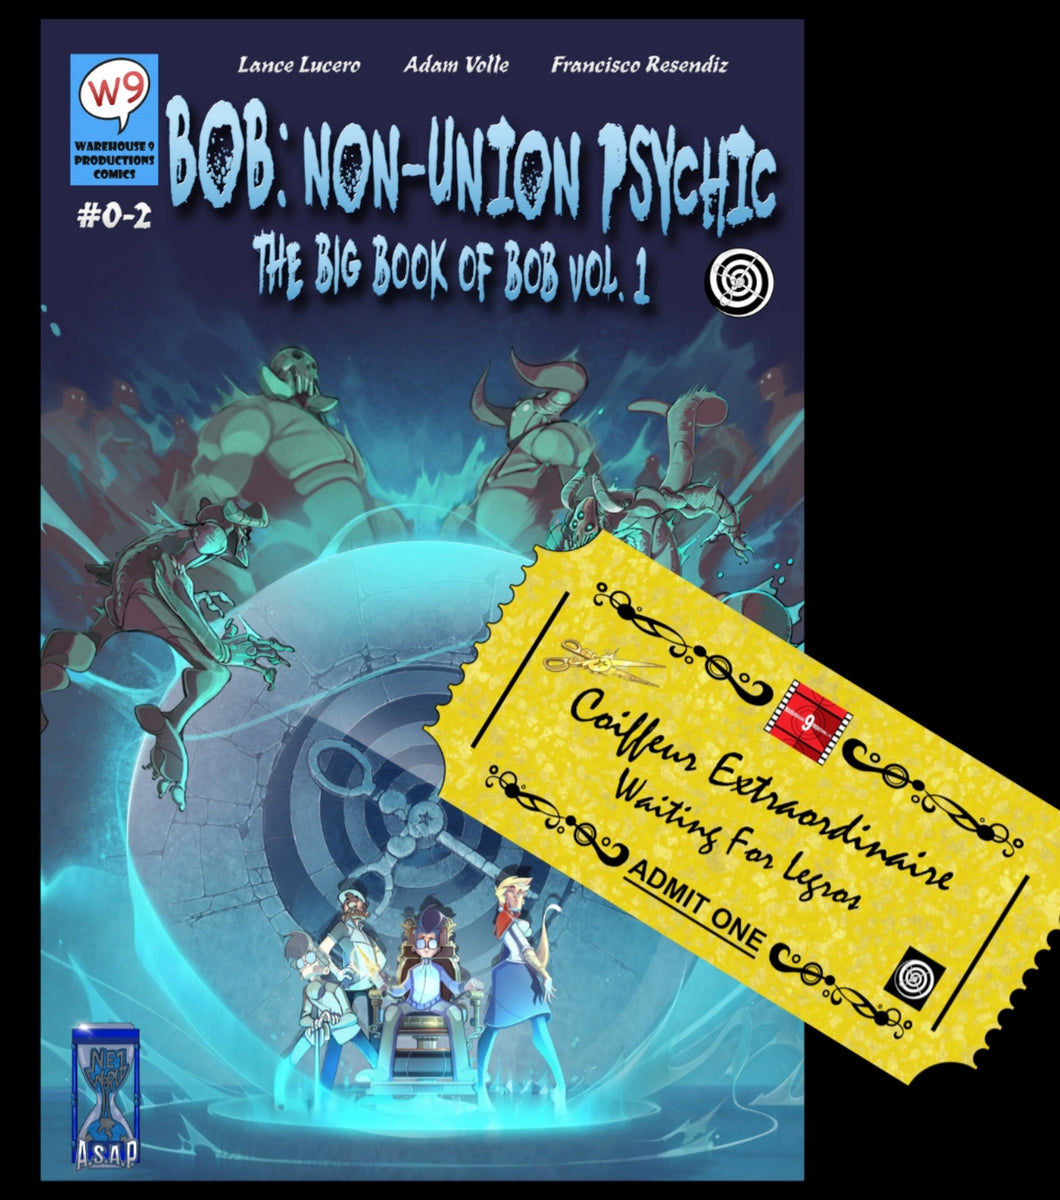 PAPERBACK WITH GOLDEN TICKET - BOB: NON-UNION PSYCHIC - THE BIG BOOK OF BOB VOL. 1